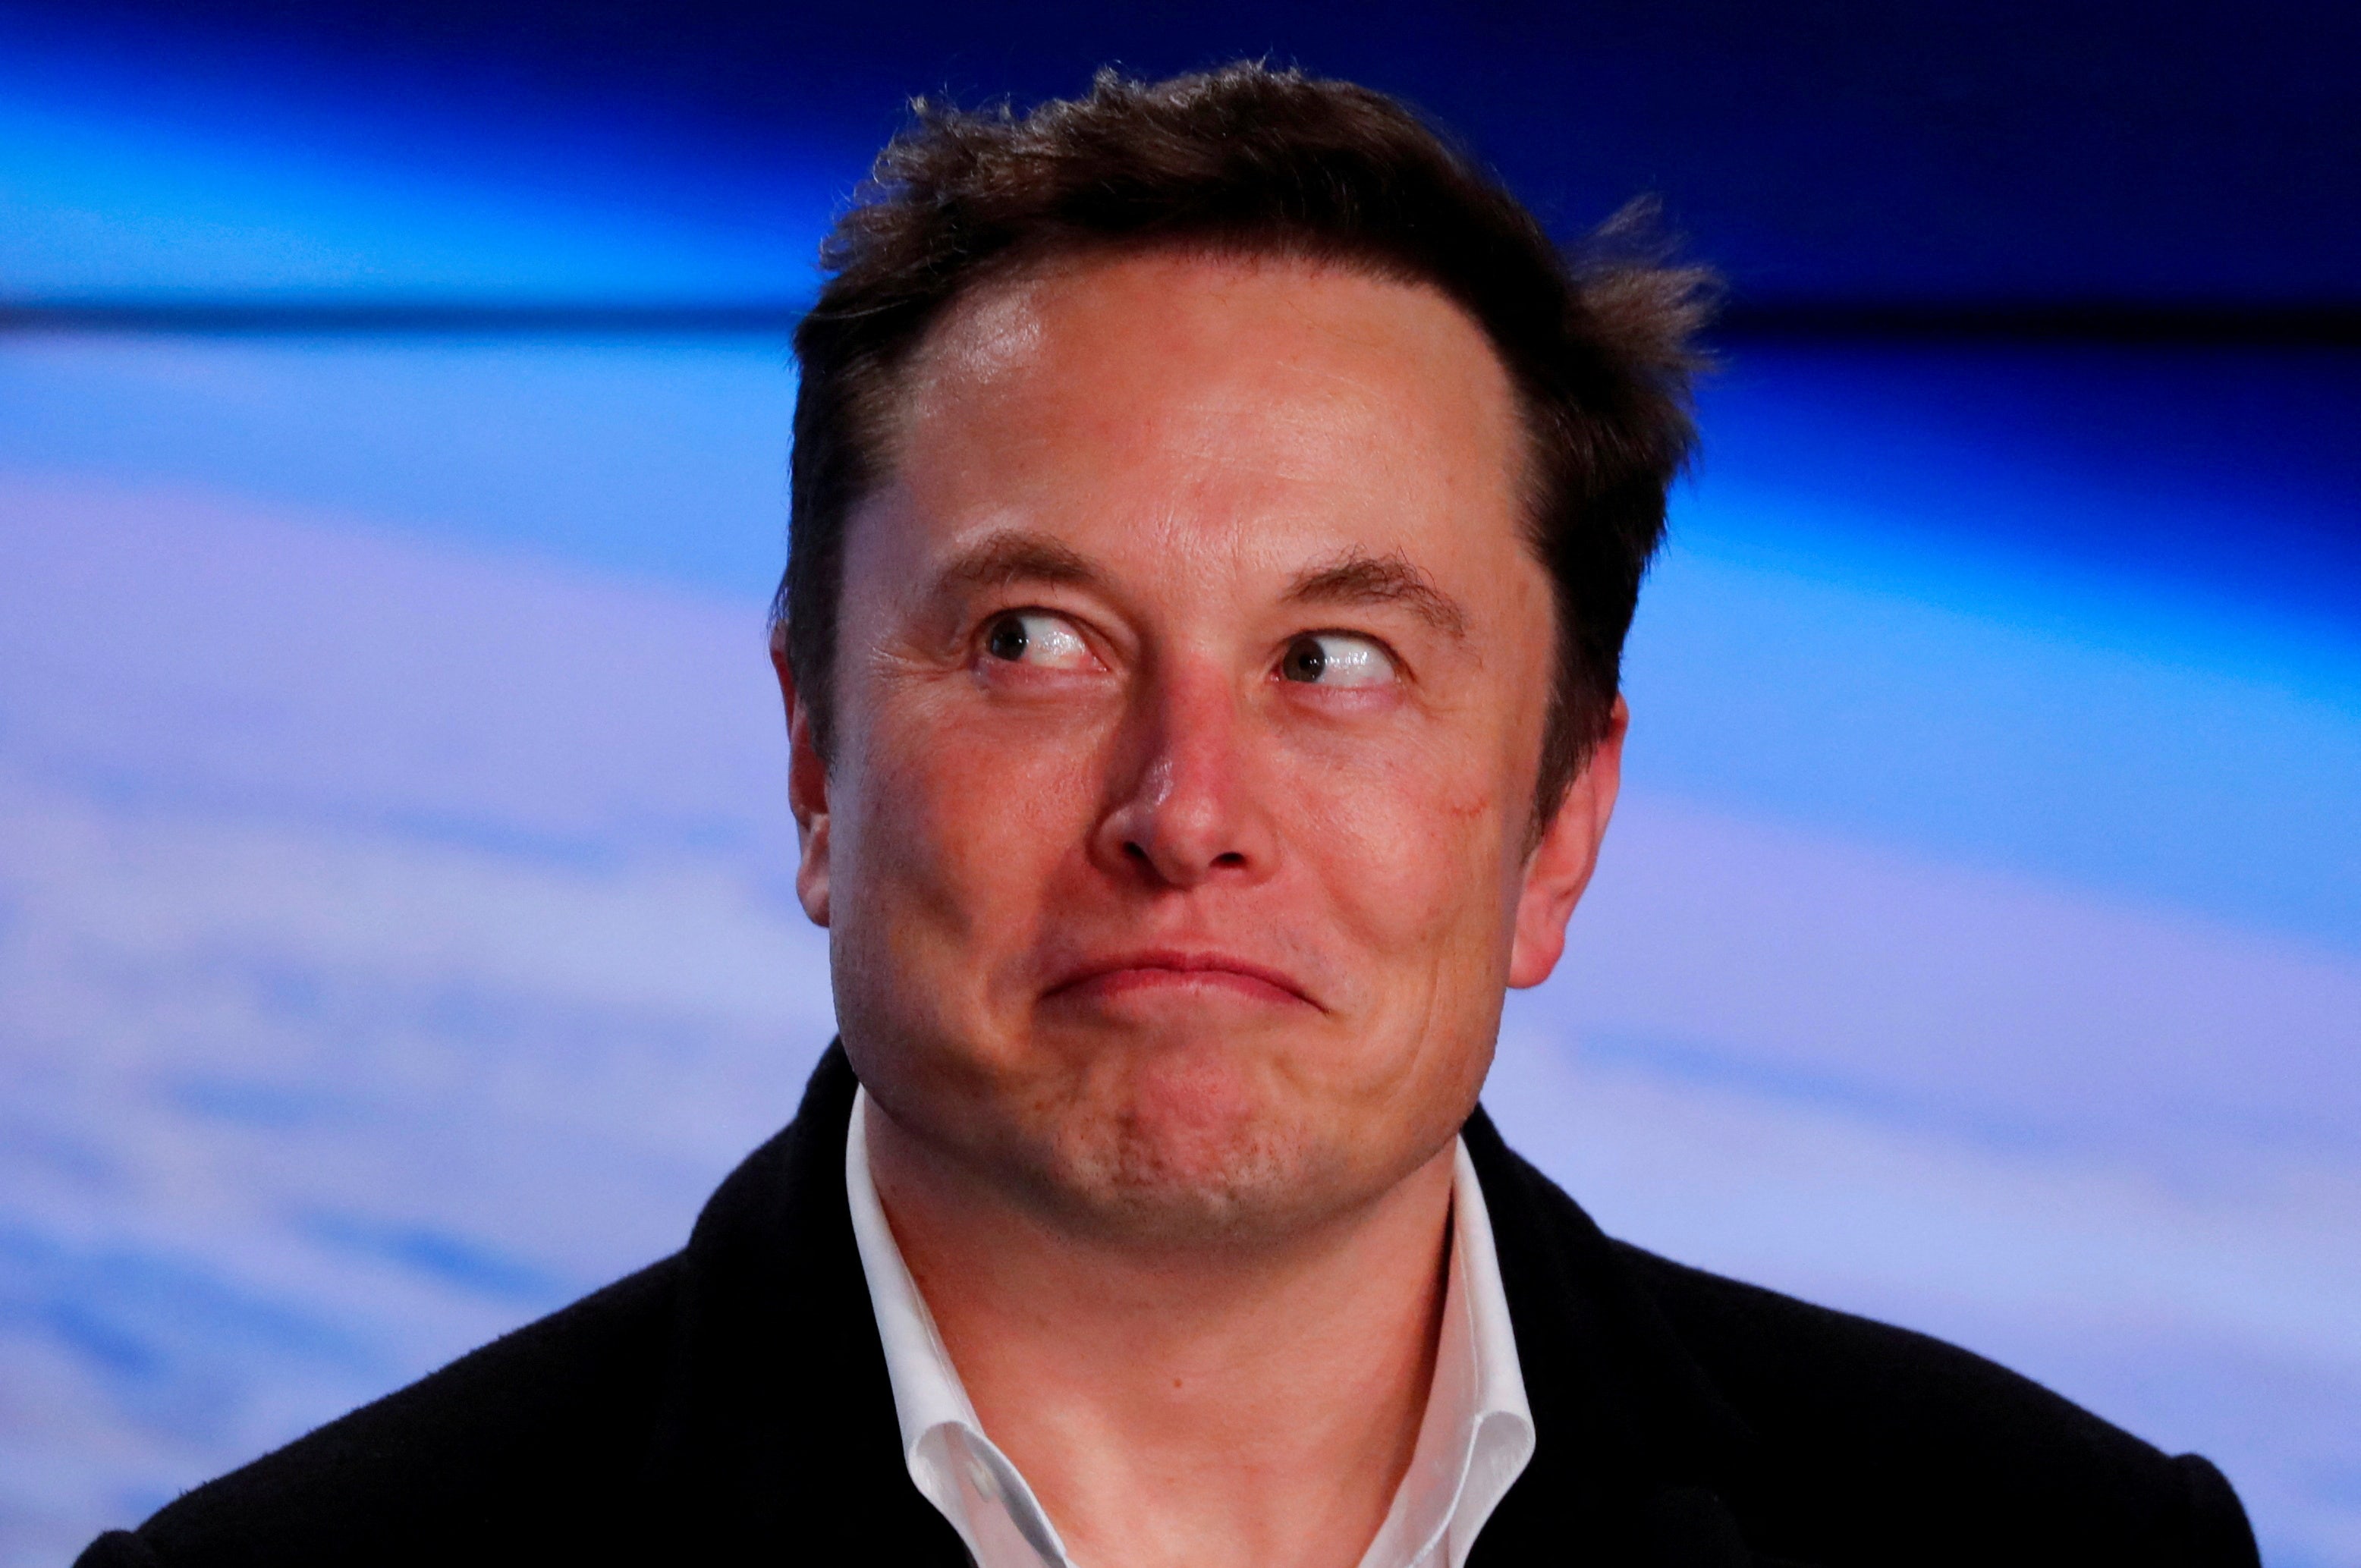 Elon Musk is the ‘ultimate gangster’ buying Twitter: Barstool Sports’ Dave Portnoy